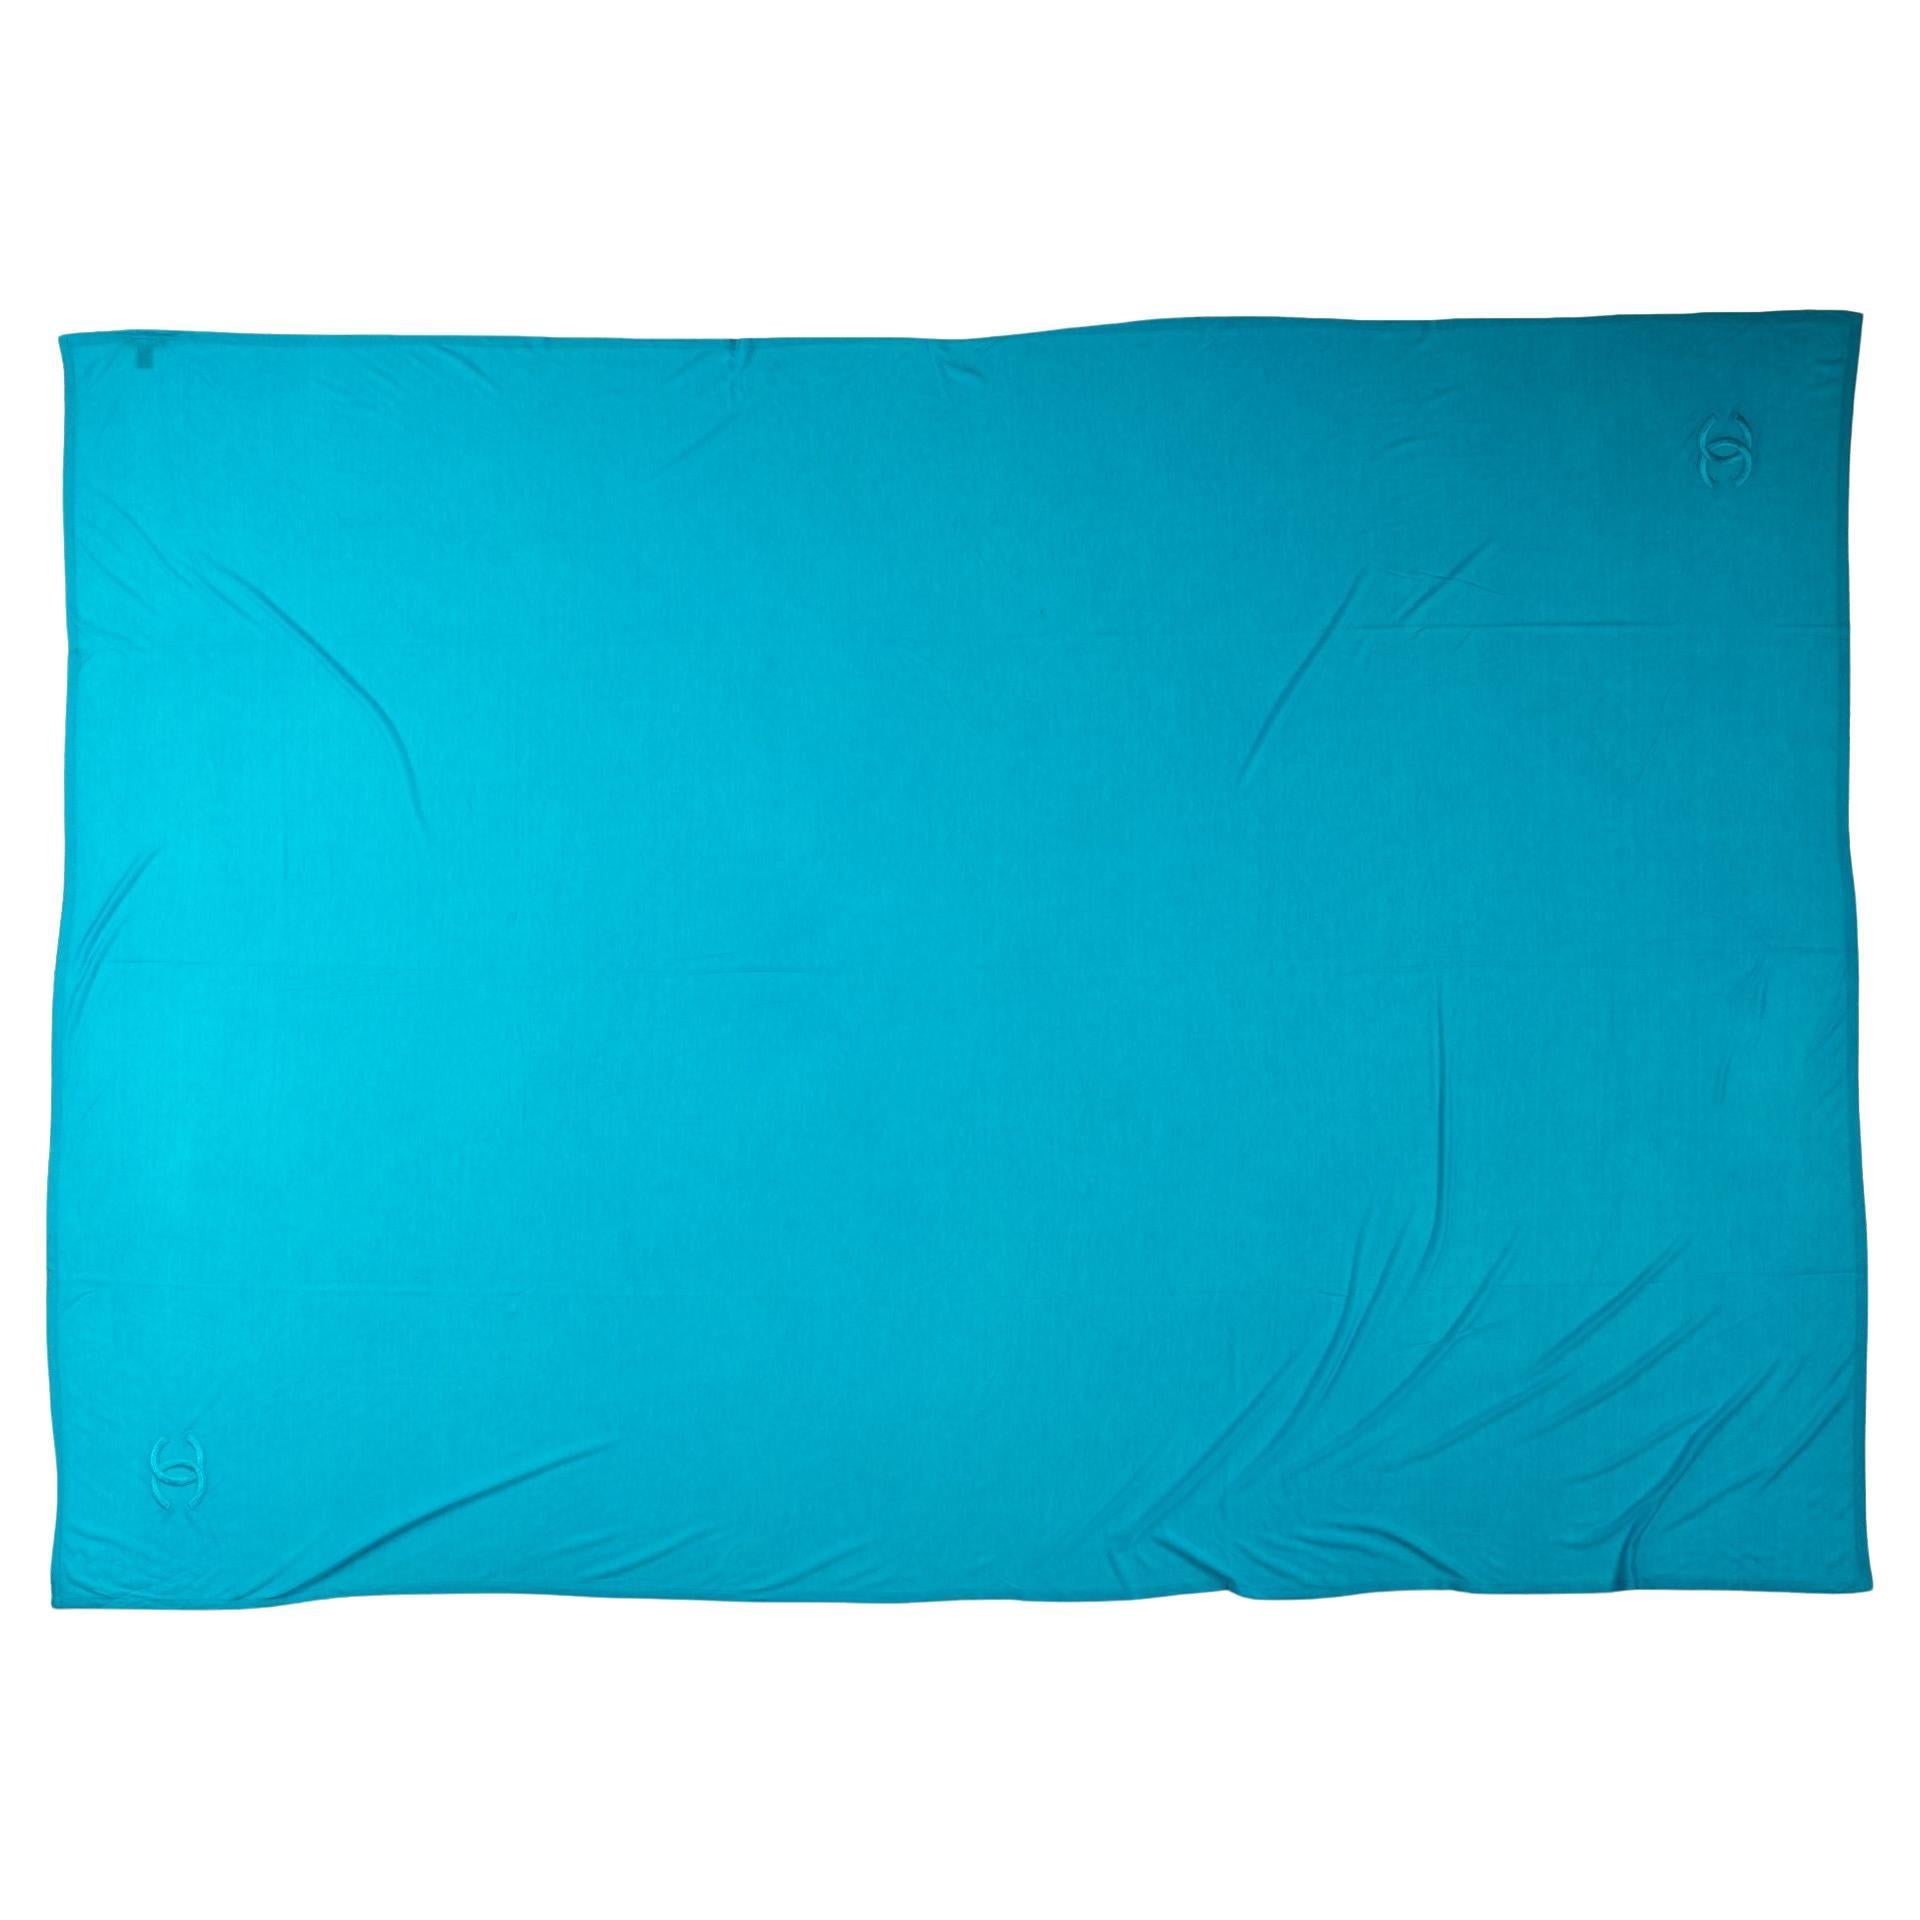 Chanel New Turquoise Scarf-Sarong Modal For Sale